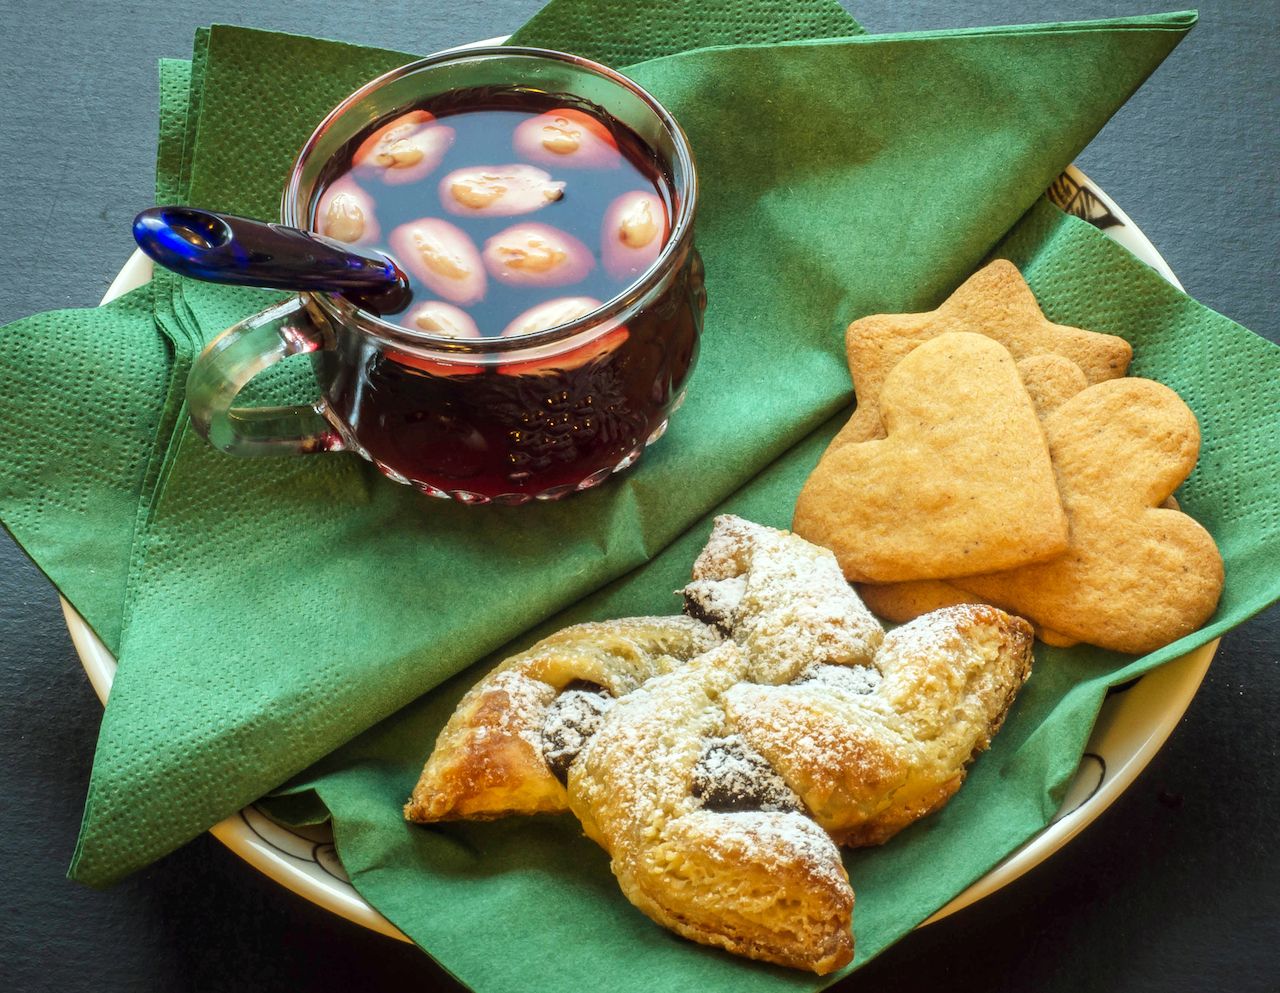 Finnish pastry and glogg